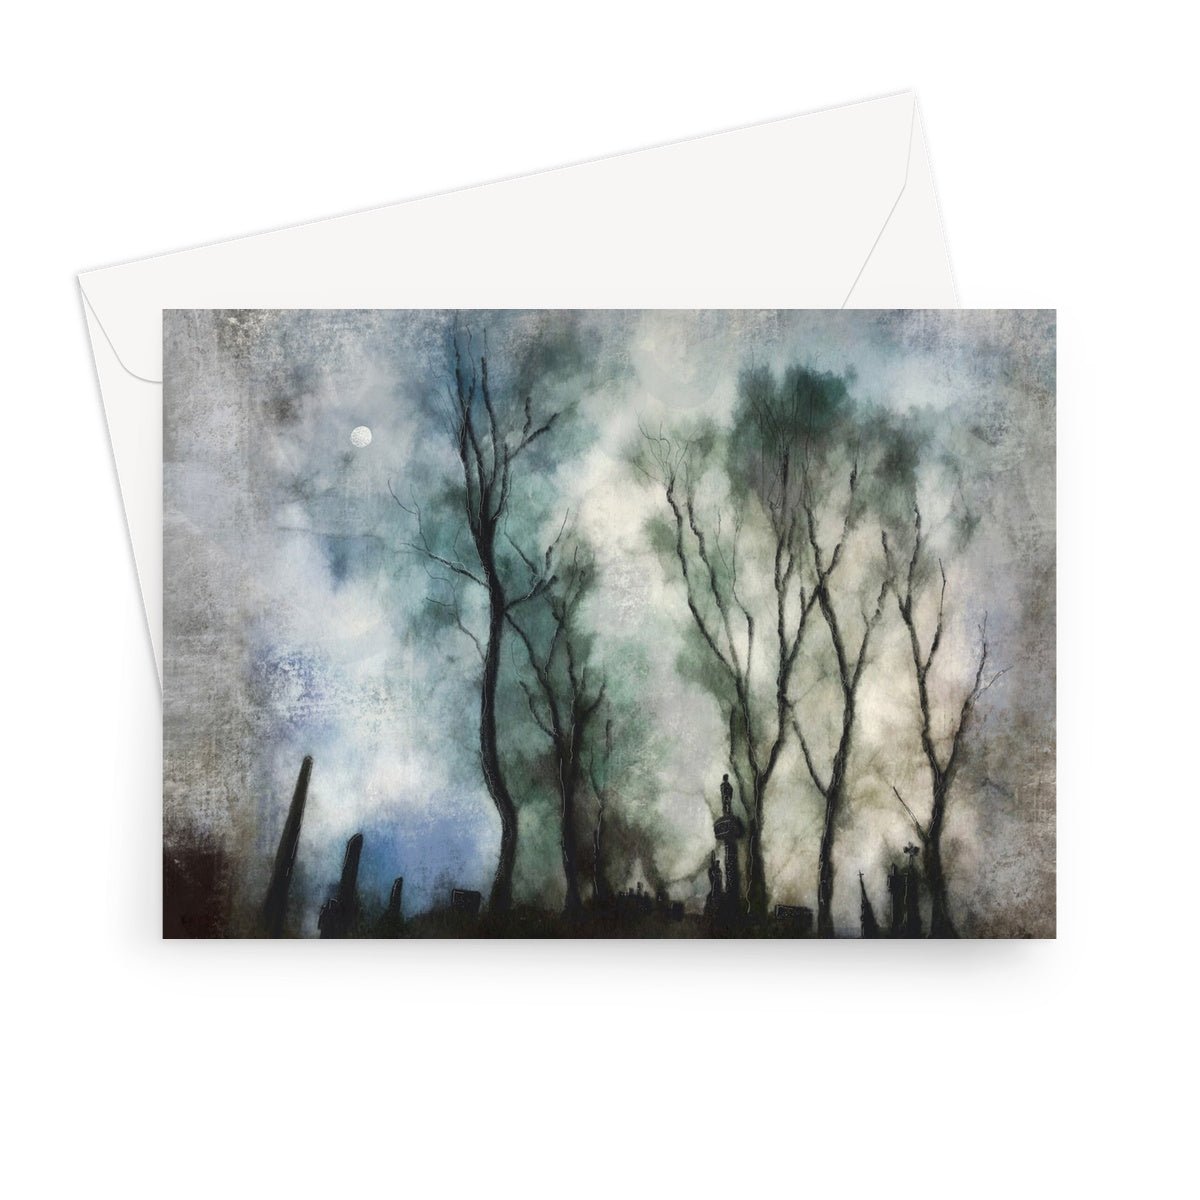 Glasgow Necropolis Moonlight Art Gifts Greeting Card-Greetings Cards-Edinburgh & Glasgow Art Gallery-7"x5"-10 Cards-Paintings, Prints, Homeware, Art Gifts From Scotland By Scottish Artist Kevin Hunter